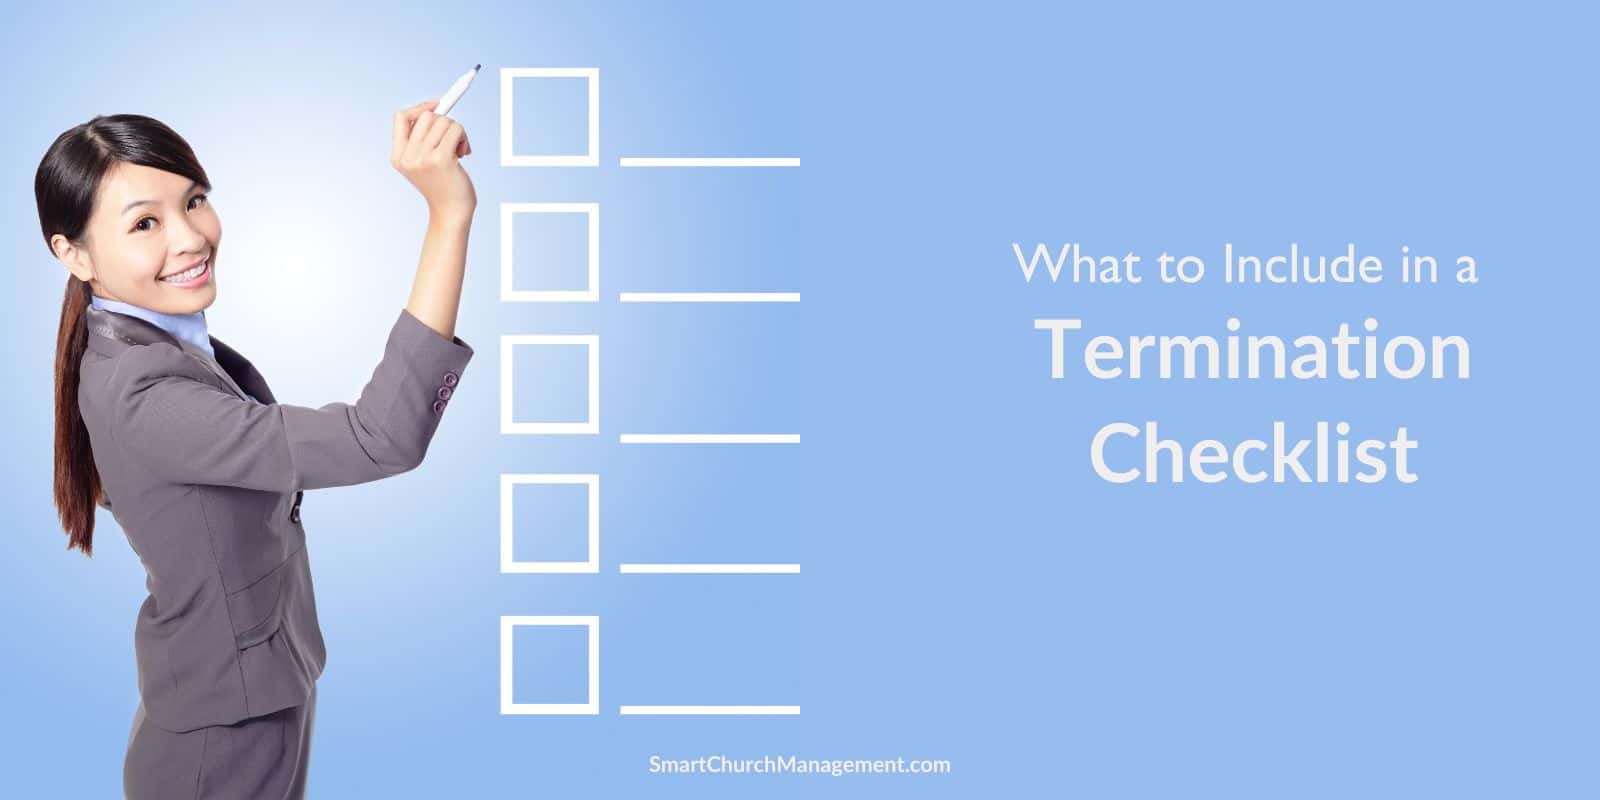 What should I include in a termination checklist